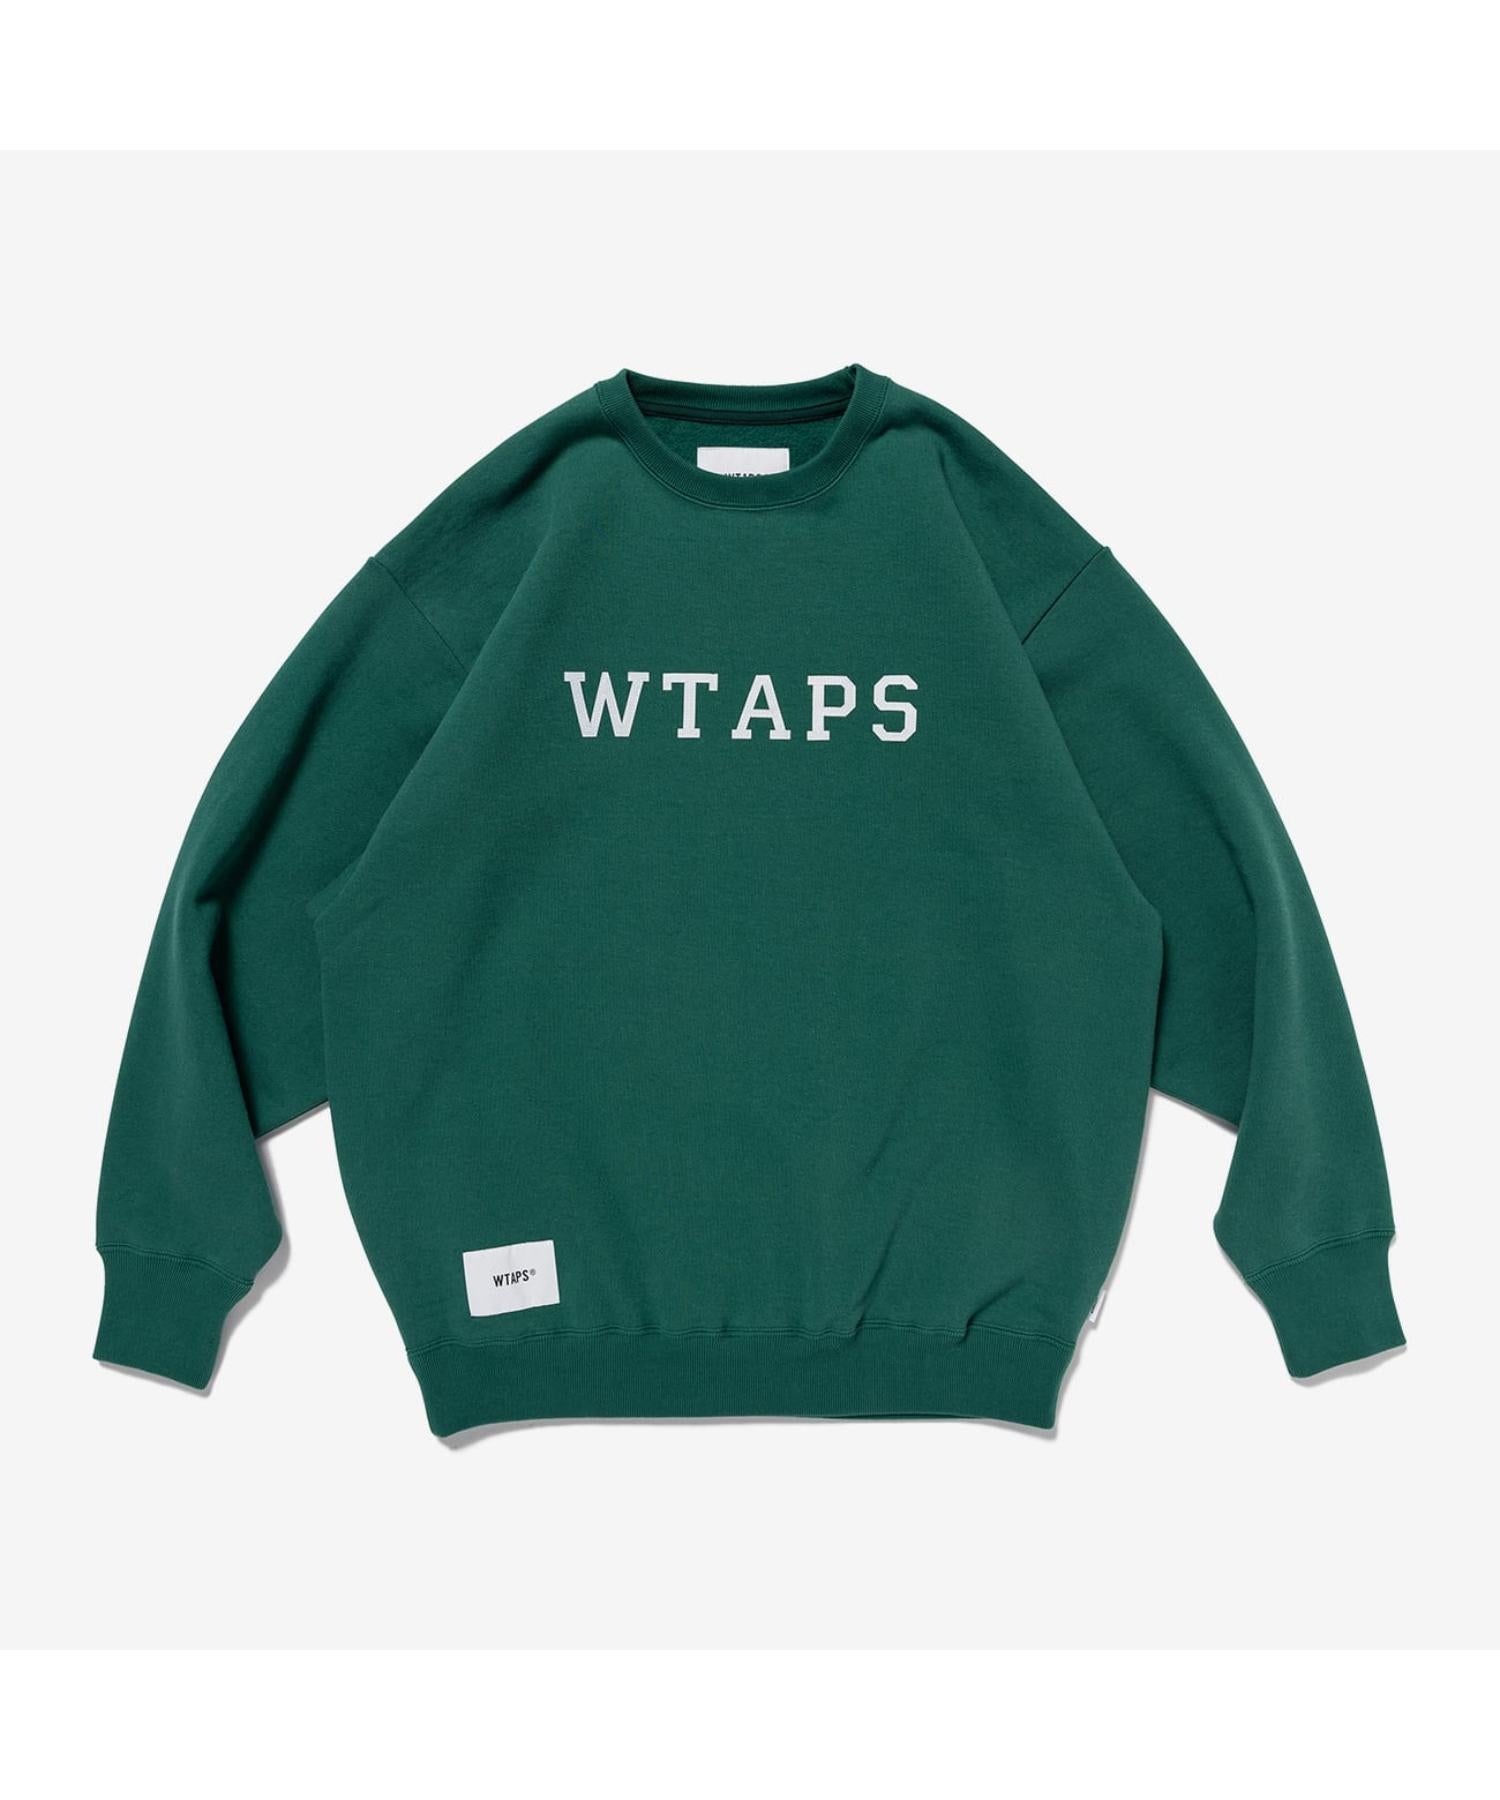 ACADEMY / SWEATER / COTTON. COLLEGE - WTAPS (ダブルタップス 